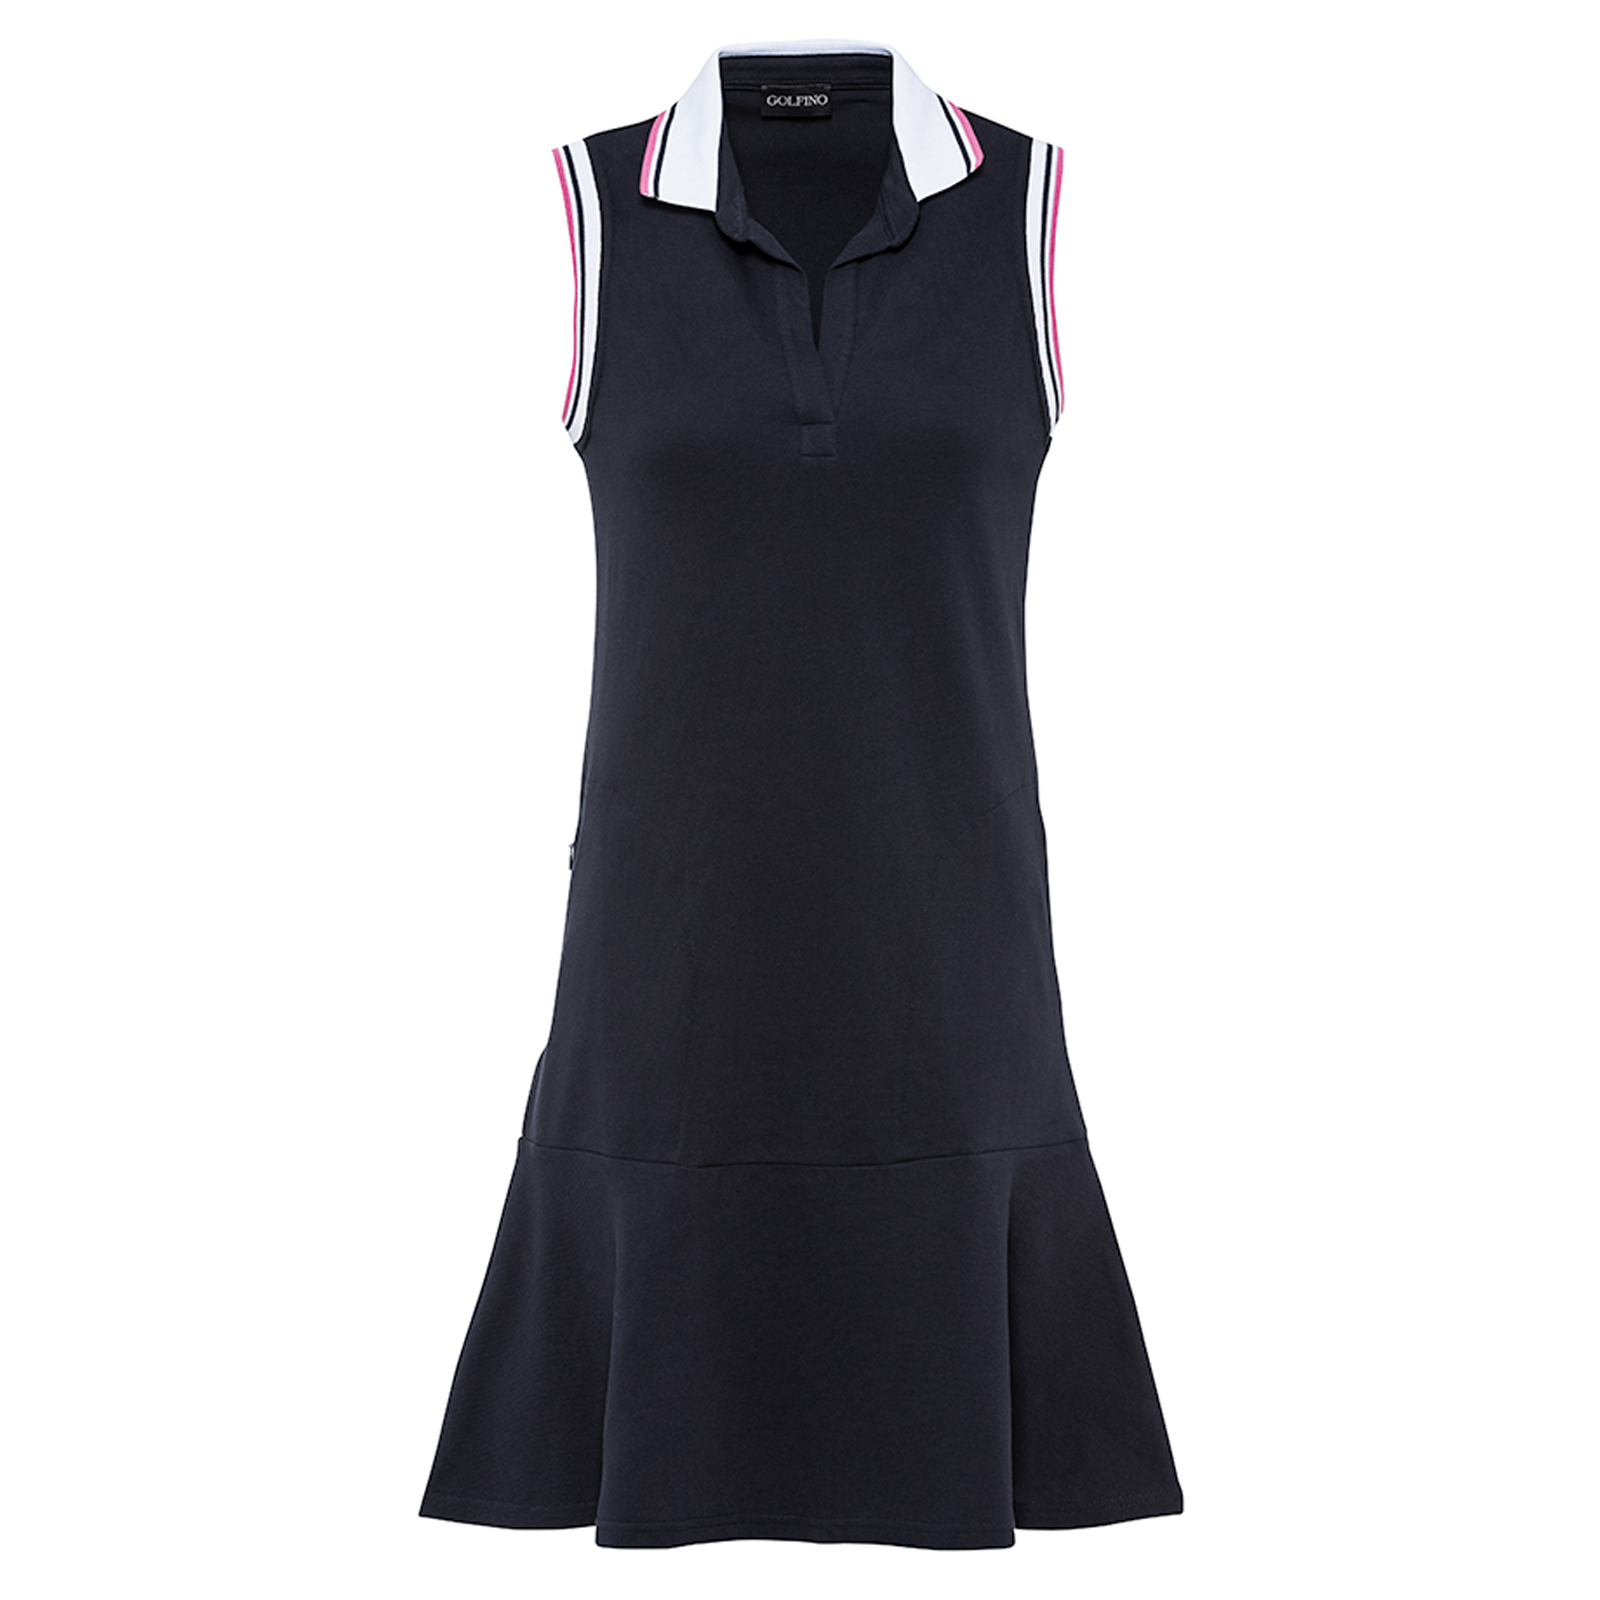 Sleeveless ladies' golf dress with sun protection in slim fit